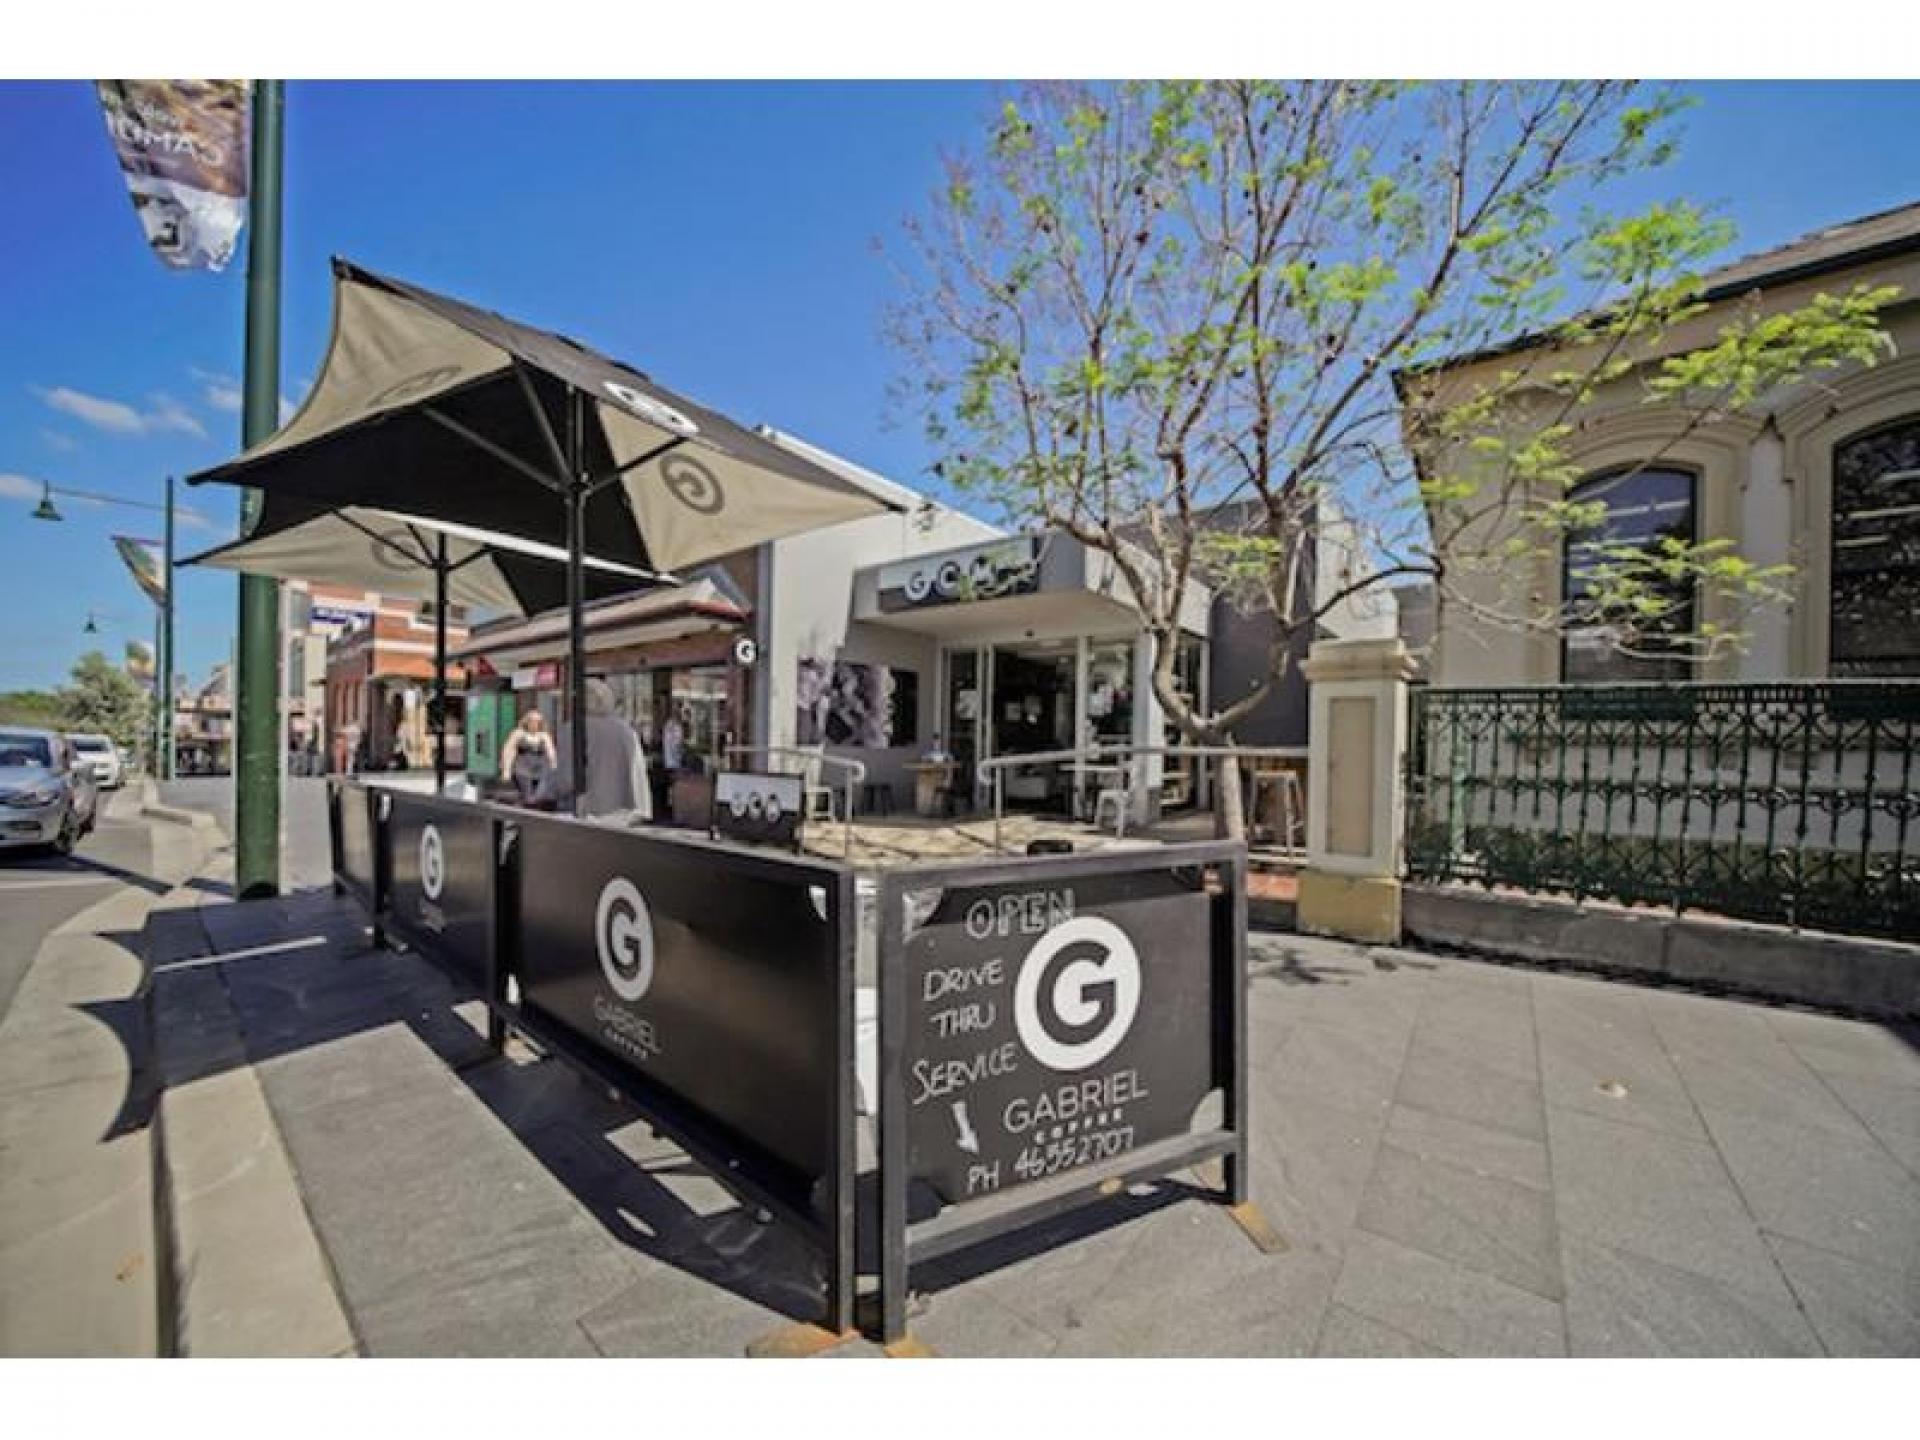 Pattisserie-style Coffe house for sale in Camden NSW